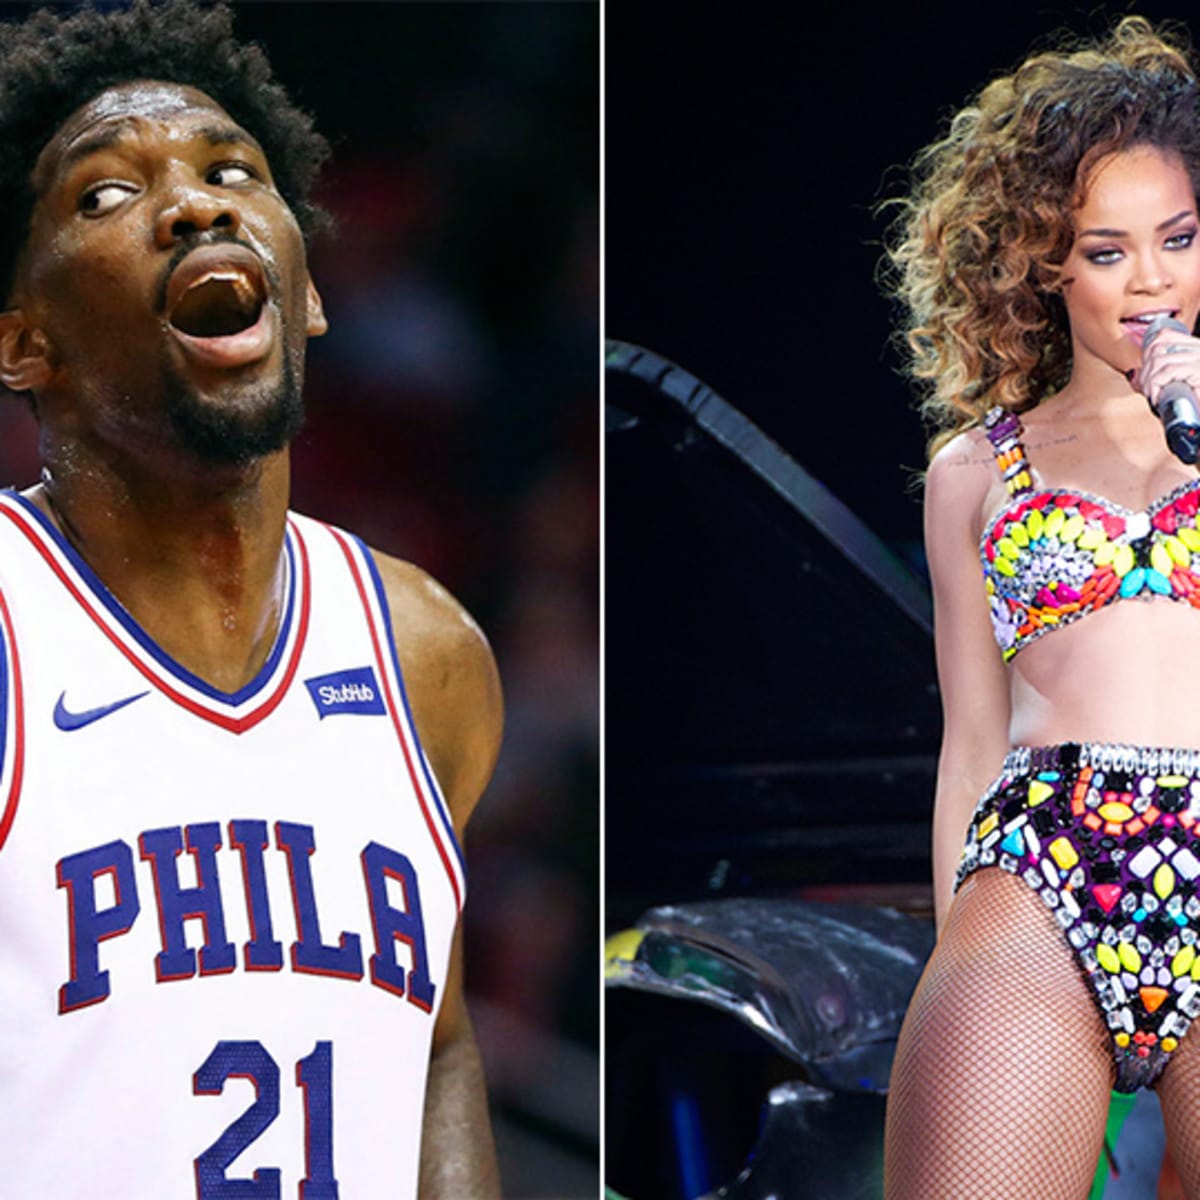 Joel Embiid happily posted a (photoshopped) pic of Rihanna wearing